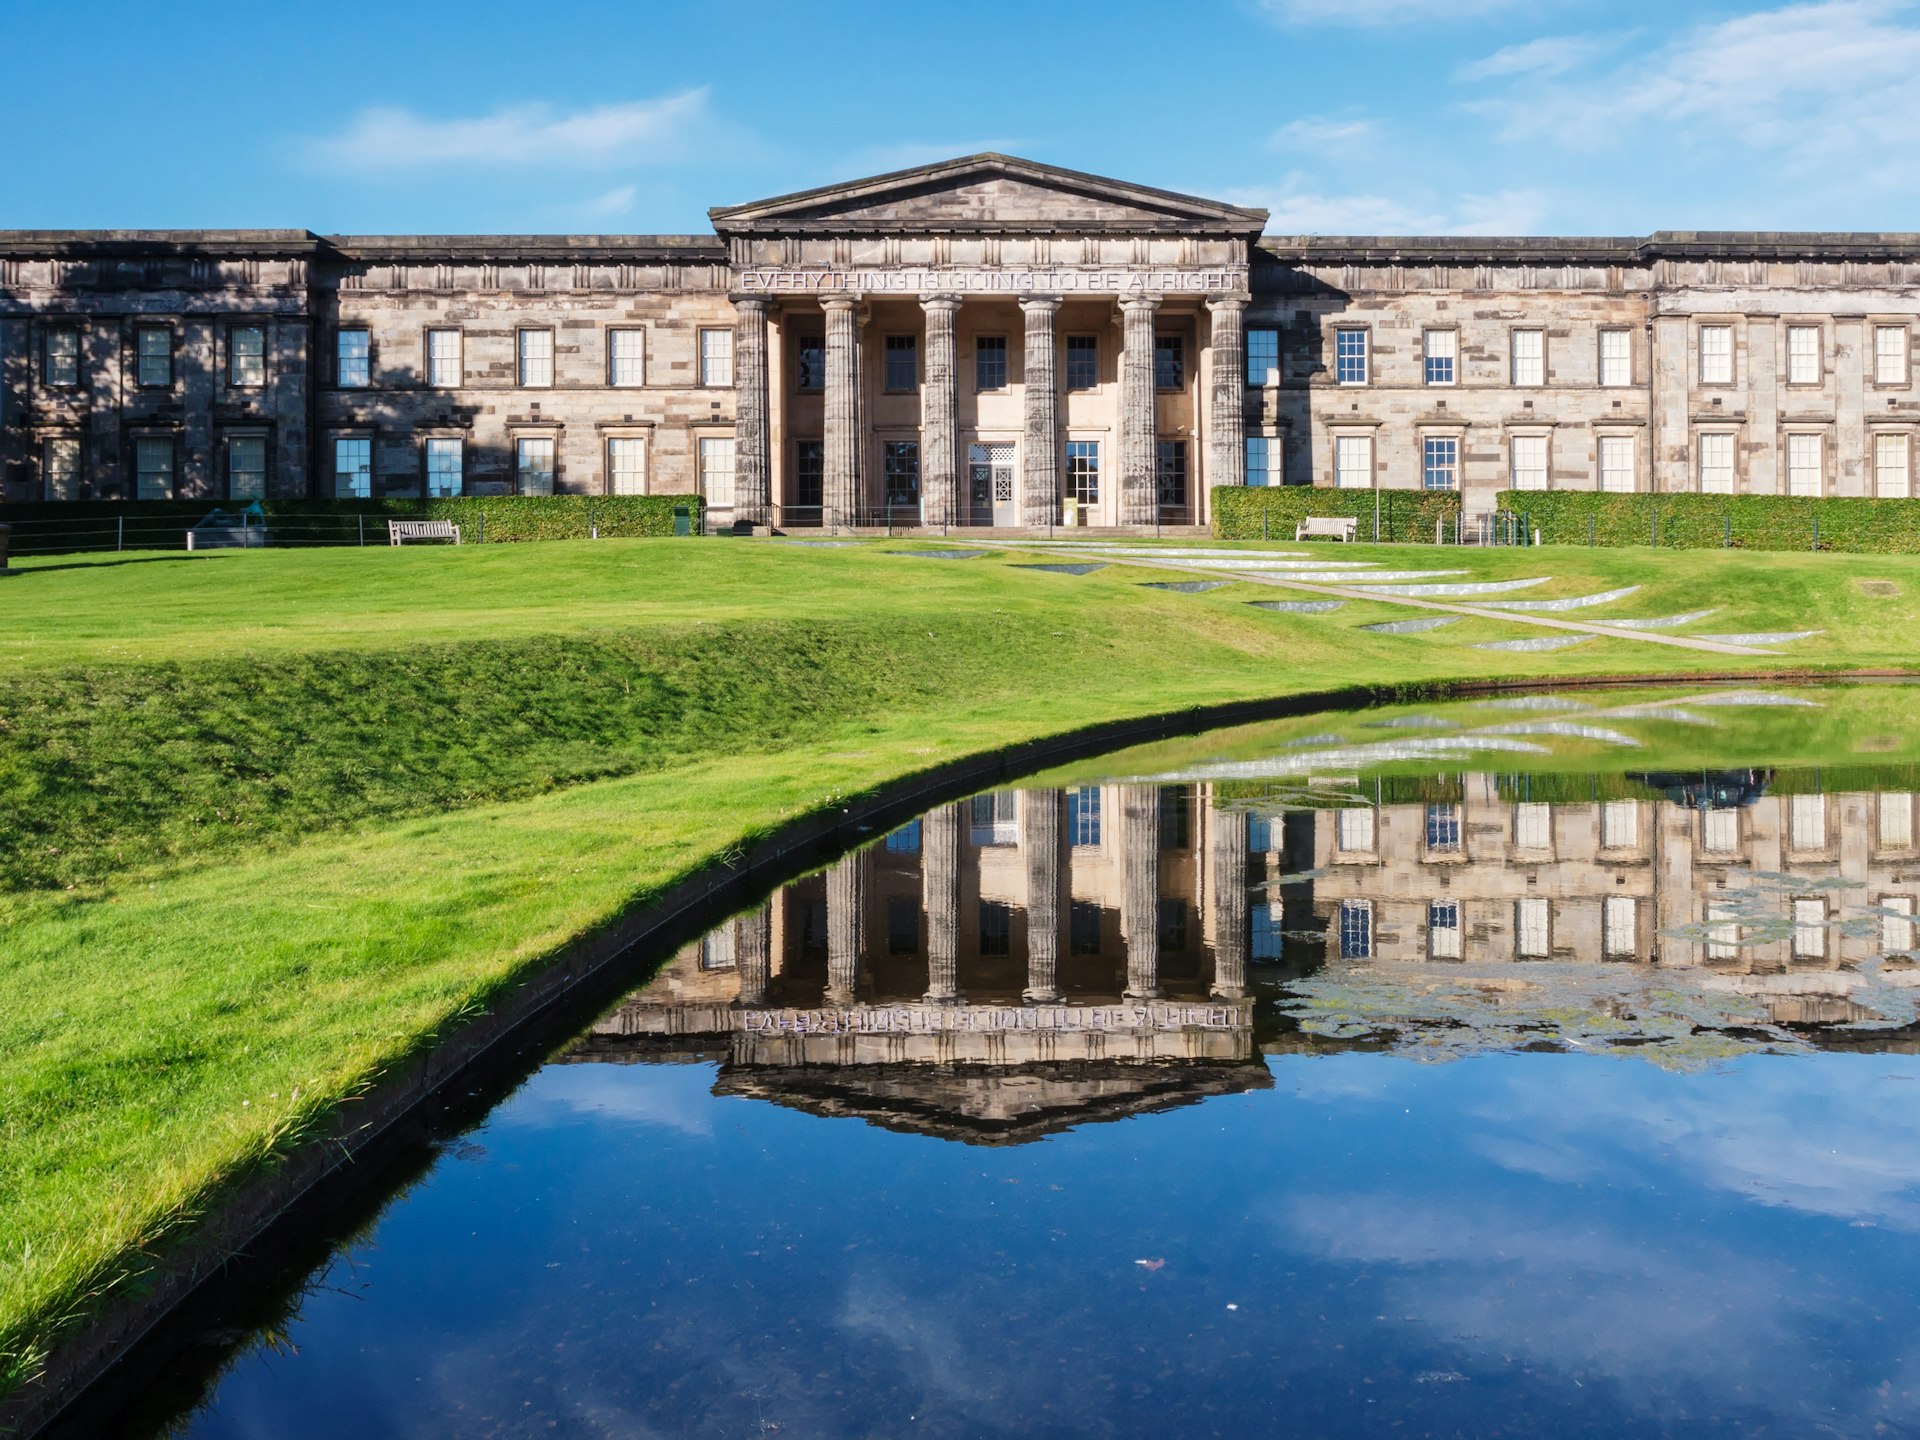 The front of the classical looking building of the Scottish National Gallery of Modern Art